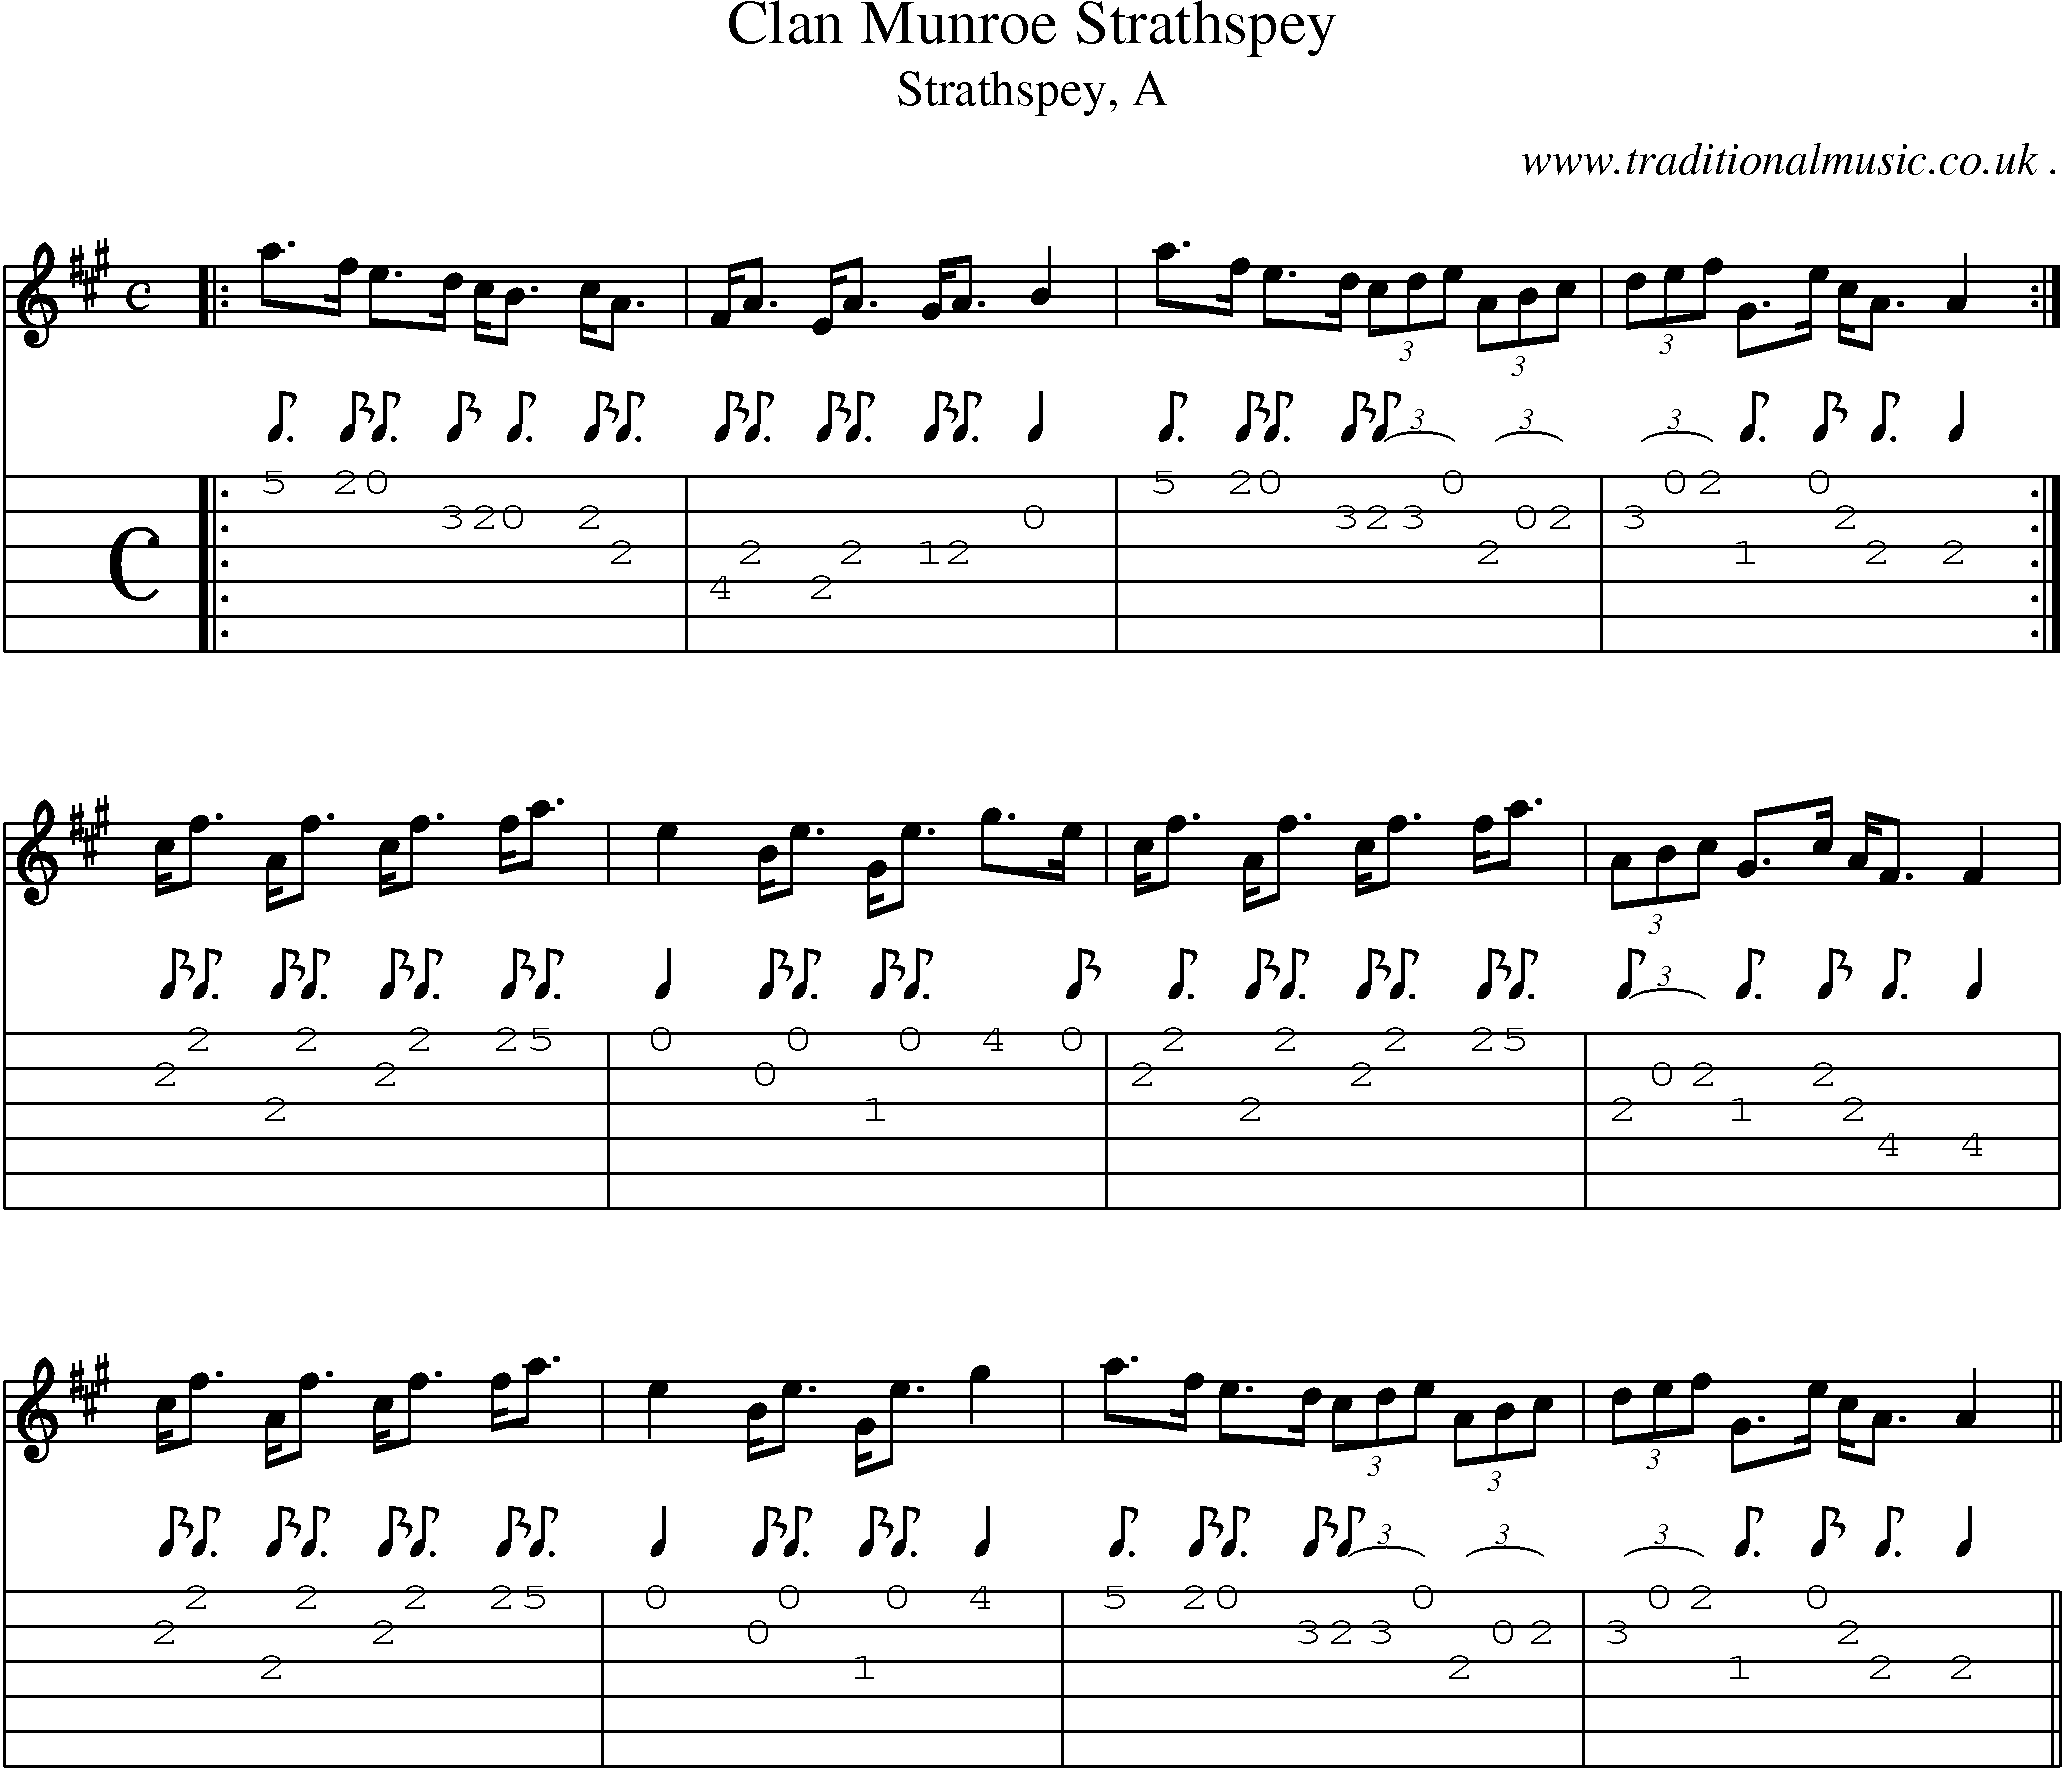 Sheet-music  score, Chords and Guitar Tabs for Clan Munroe Strathspey